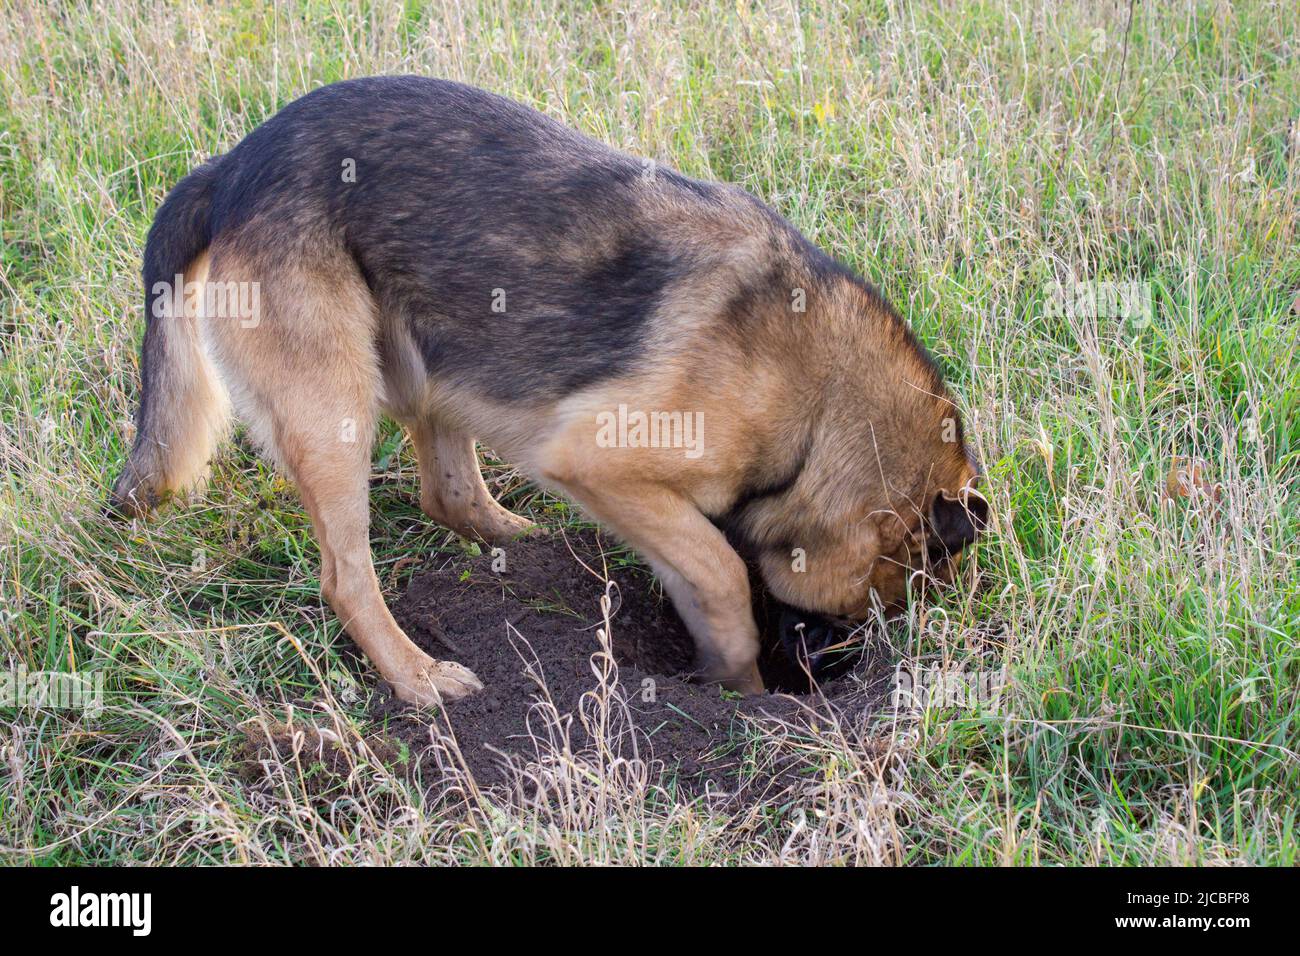 funny and silly dog digs a hole in the grass outdoors Stock Photo